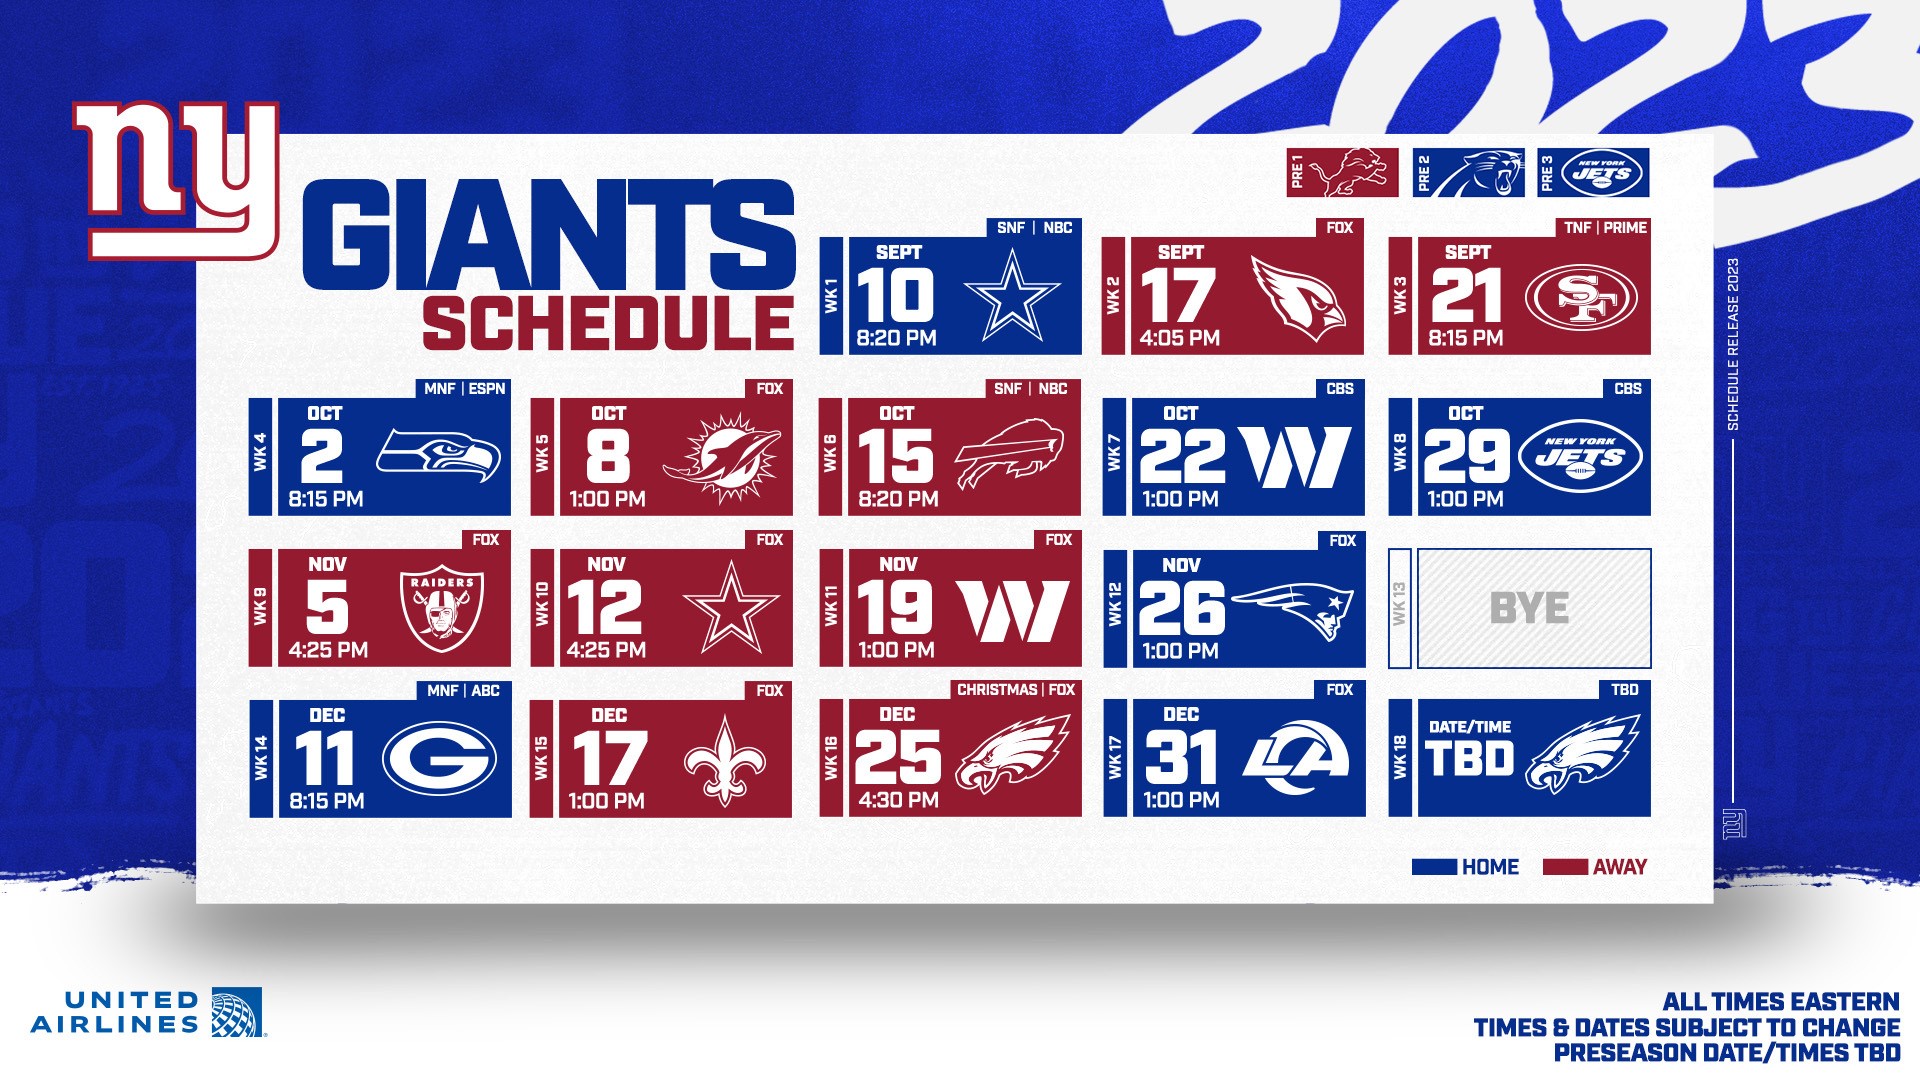 6 takeaways from the 2021 New York Giants schedule - Big Blue View